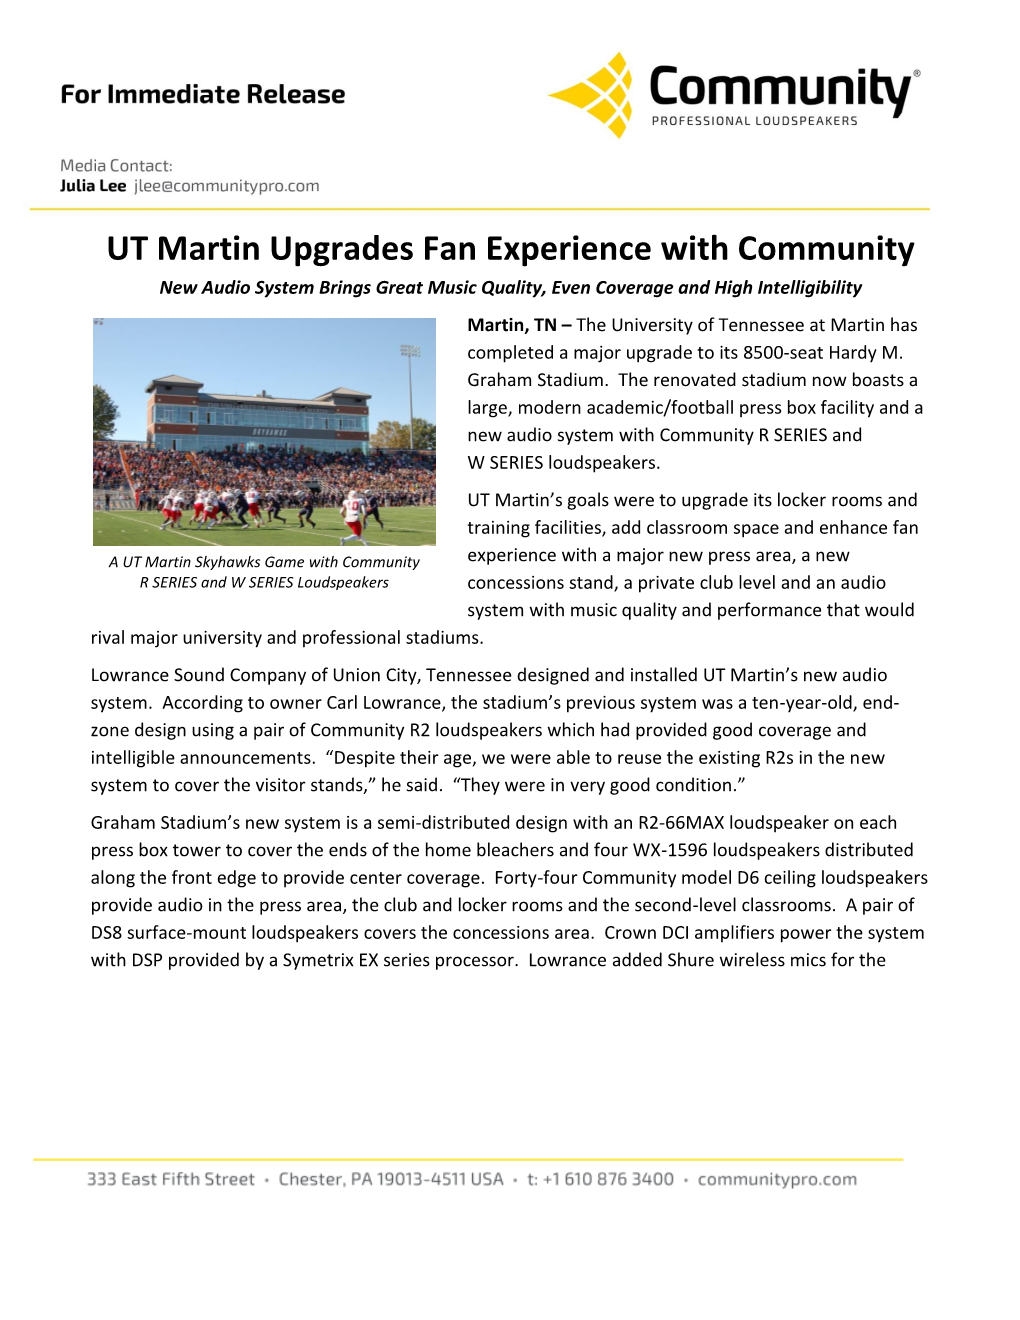 UT Martin Upgrades Fan Experience with Community